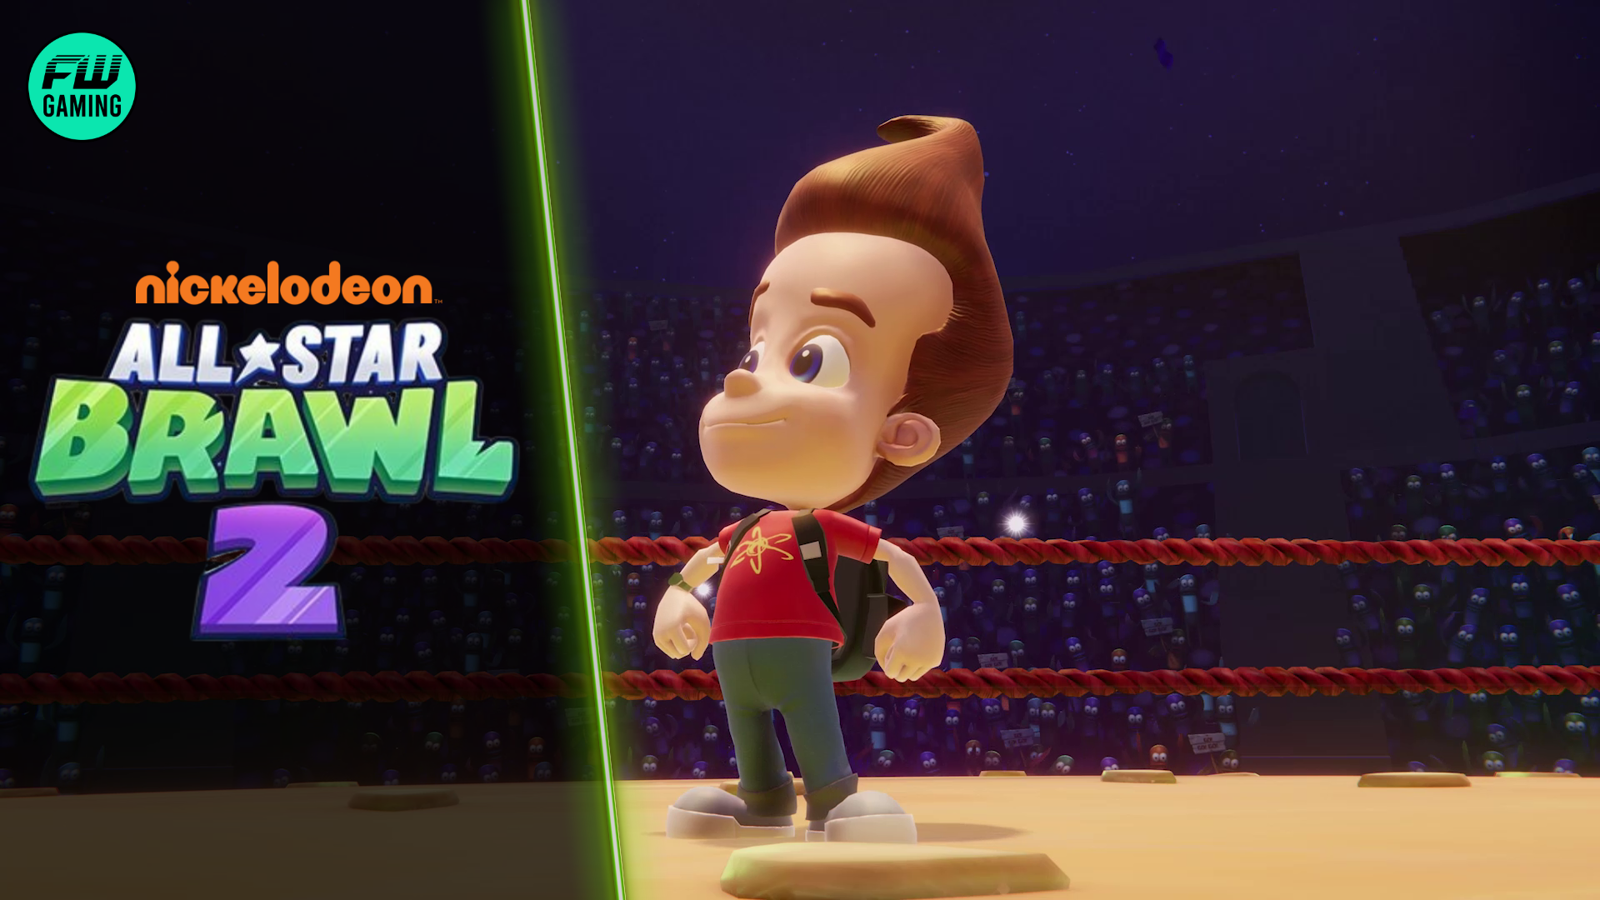 Nickelodeon All-Star Brawl 2 Gets a Delayed Release Date